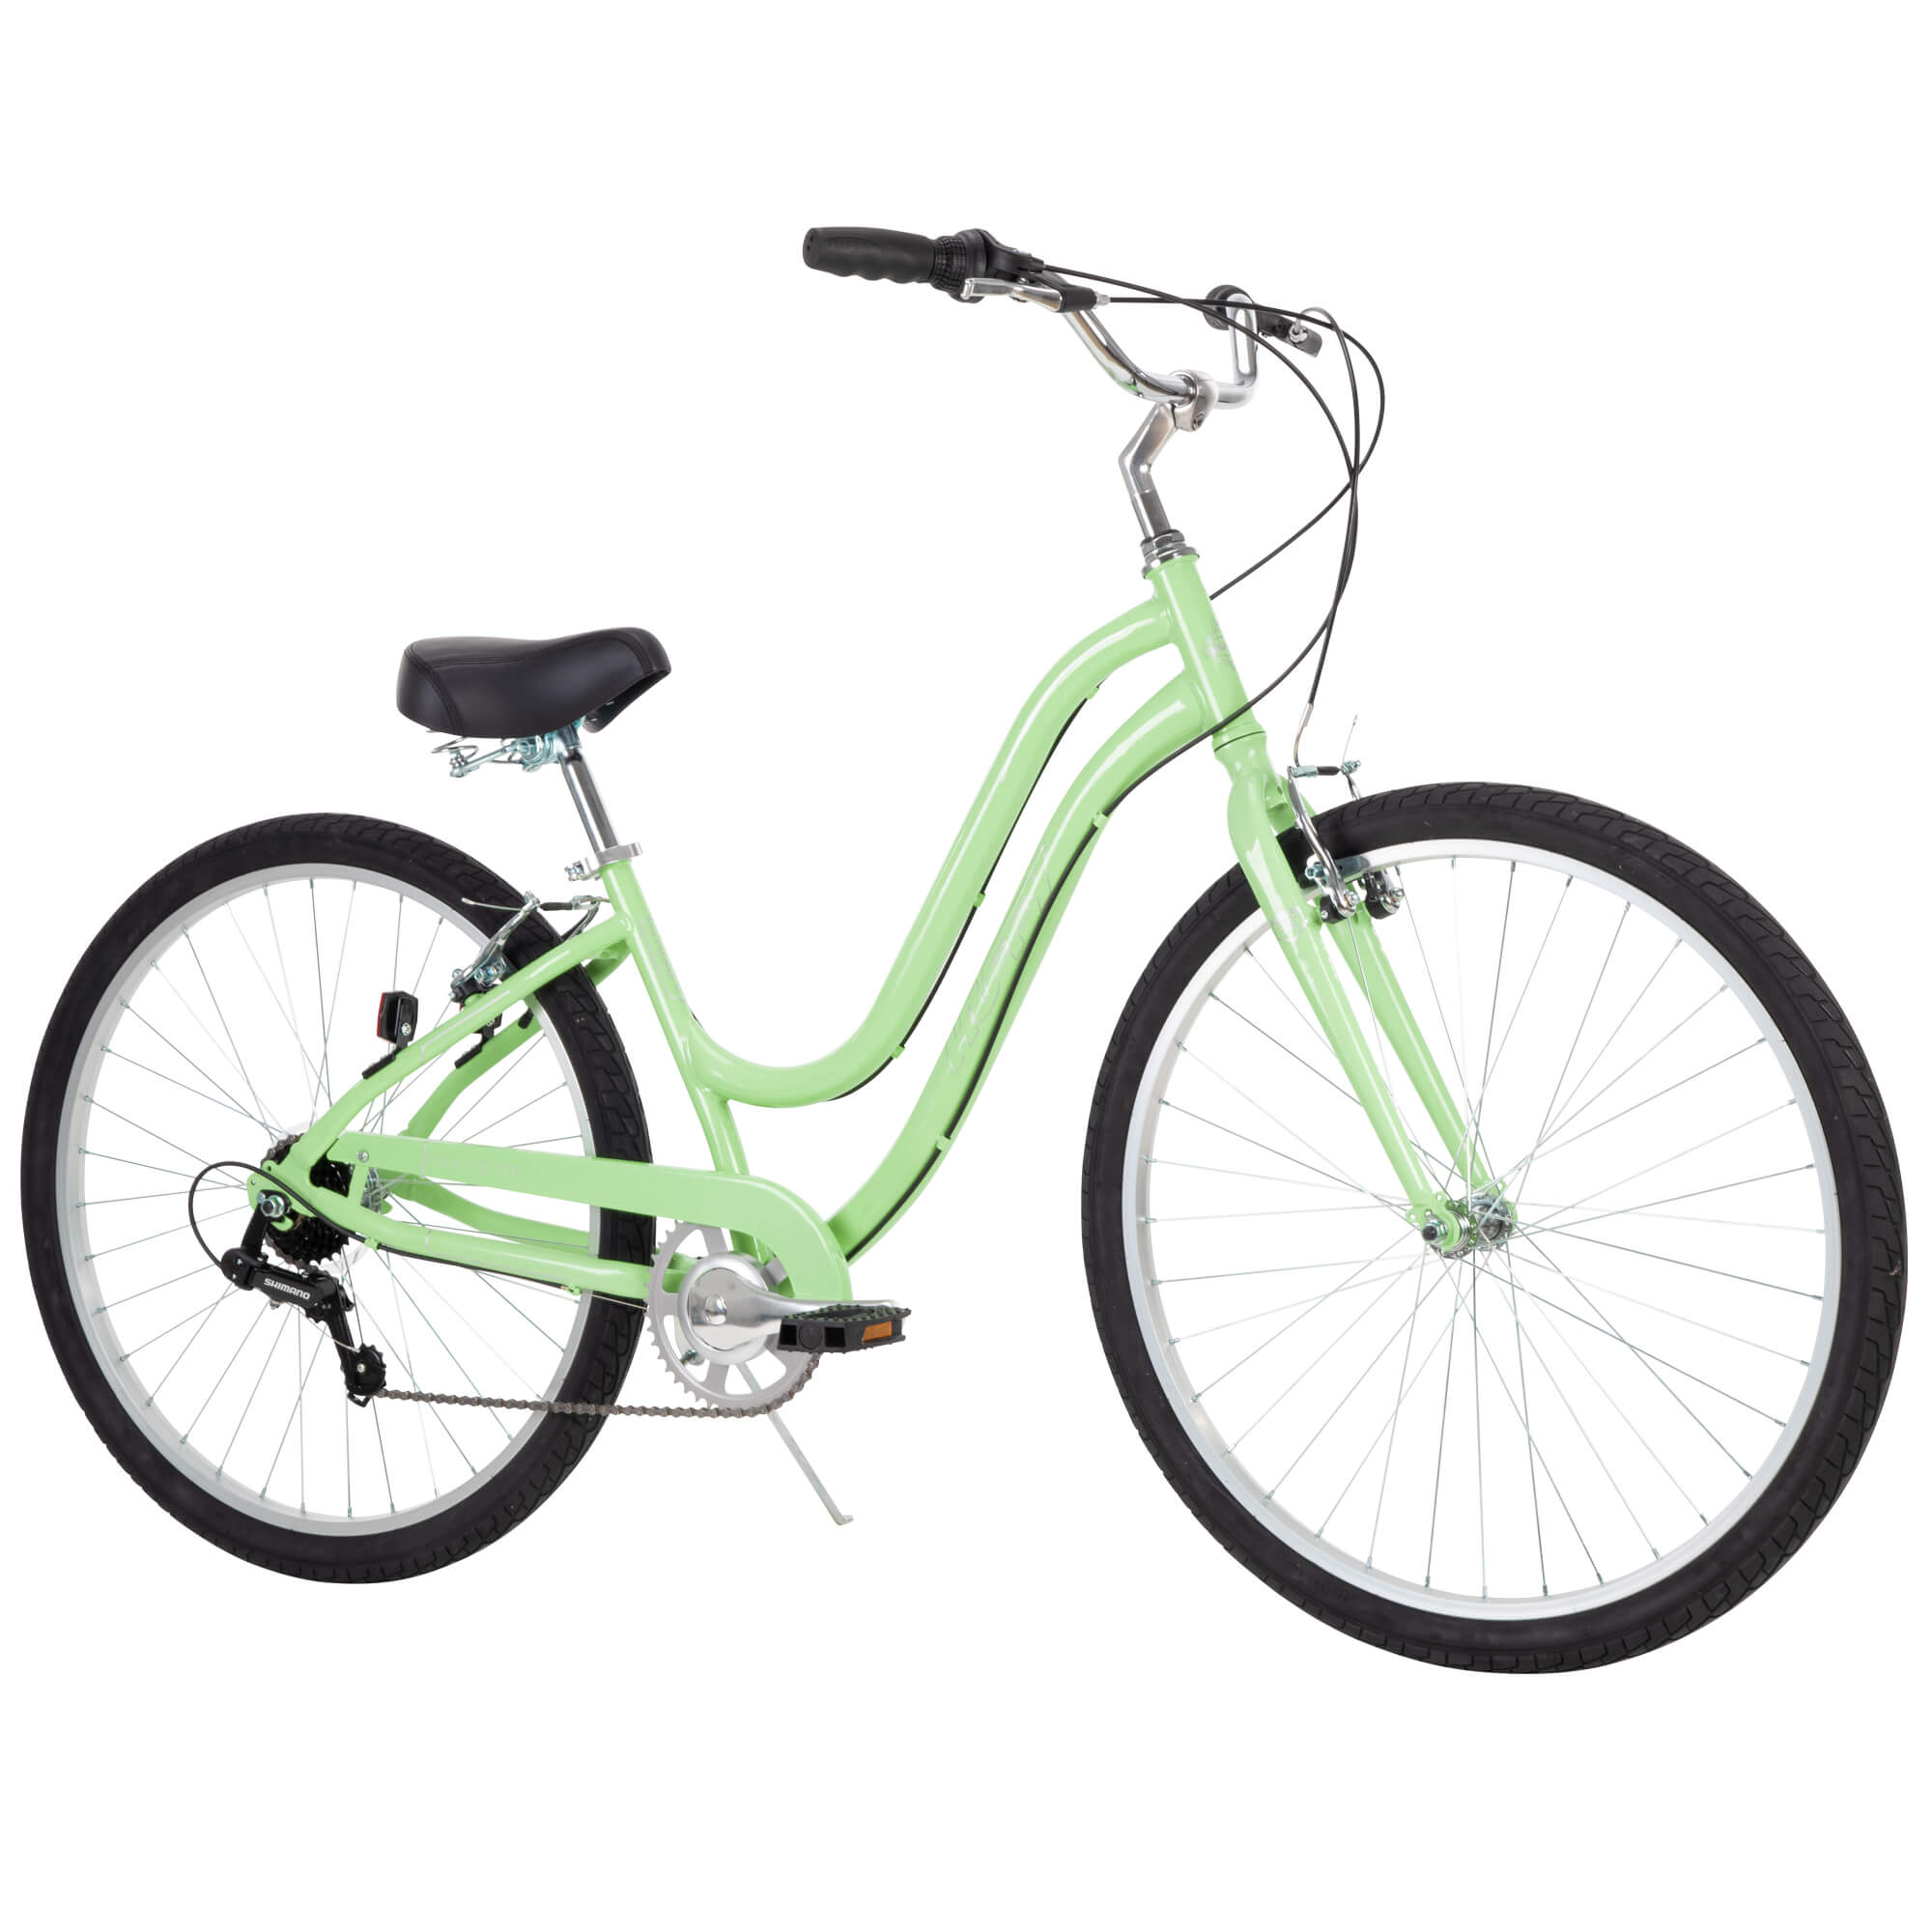 Huffy 27.5 in. Parkside Women's Comfort Bike with Perfect Fit Frame, Ages 13+ Years, Mint - image 1 of 11